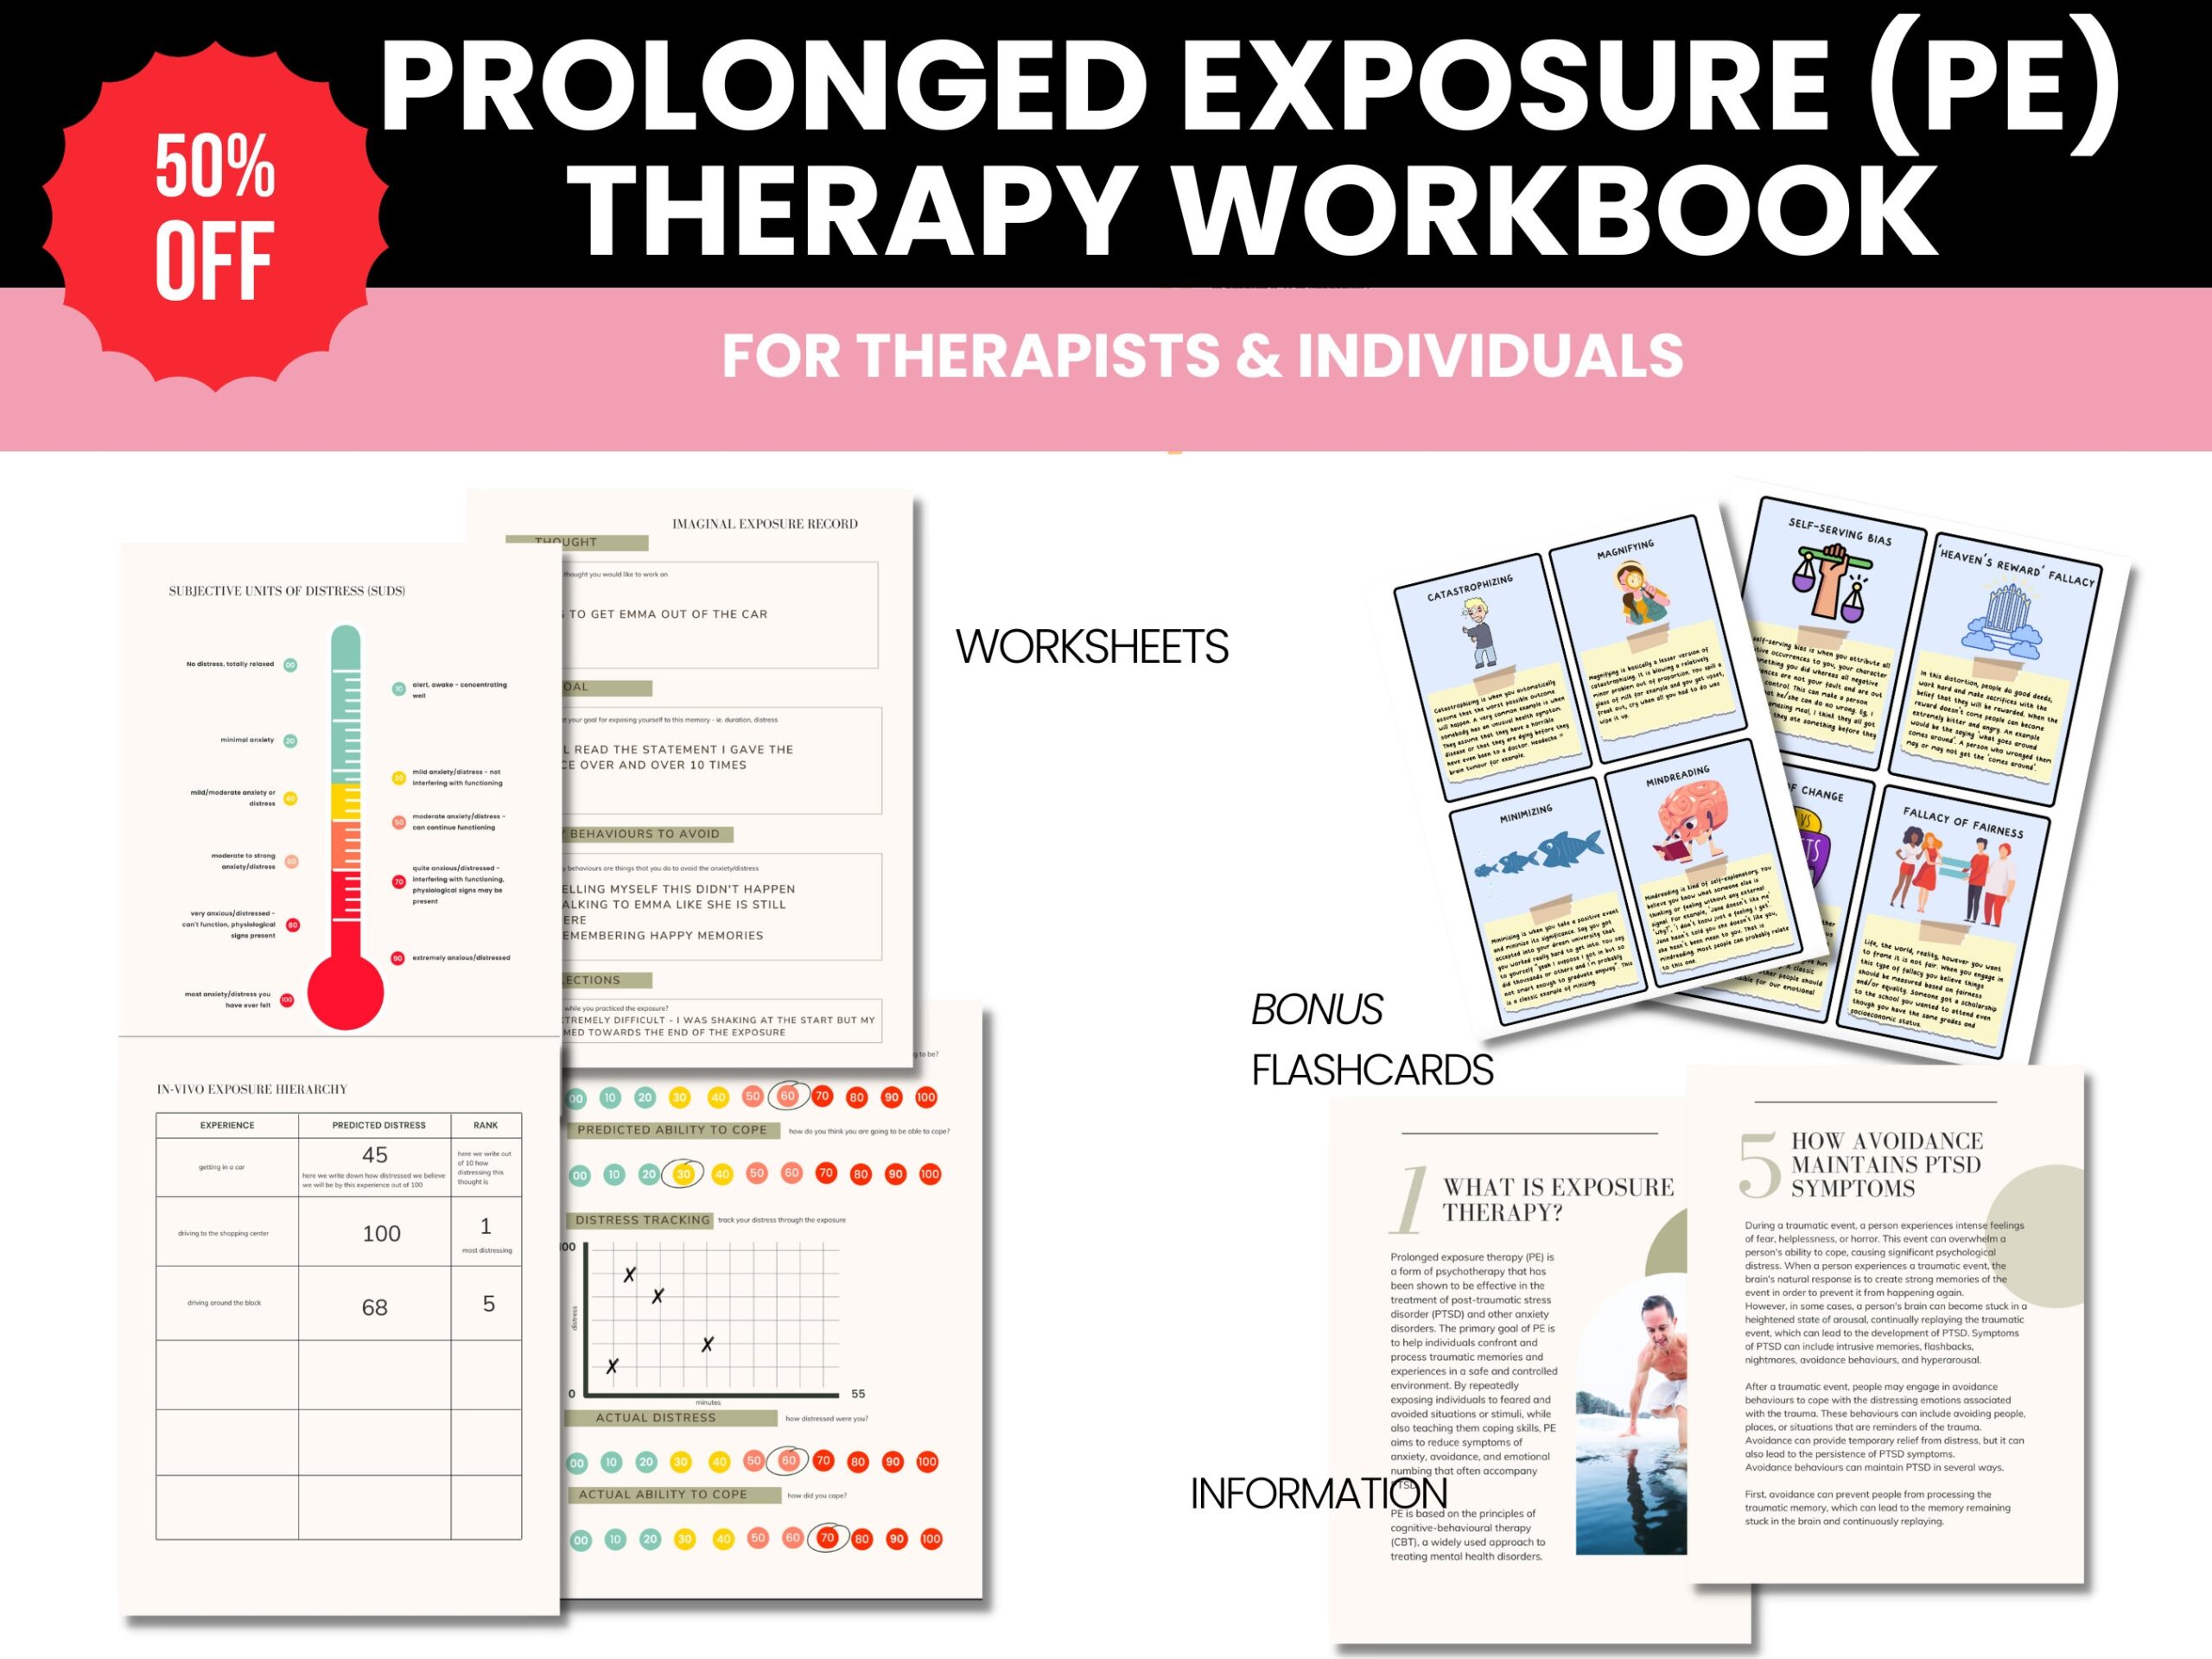 Exposure Therapy Worksheets PDF C PTSD Anxiety Prolonged Exposure PE Workbook Trauma Therapy Hierarchy In vivo Imaginal Worksheets Etsy